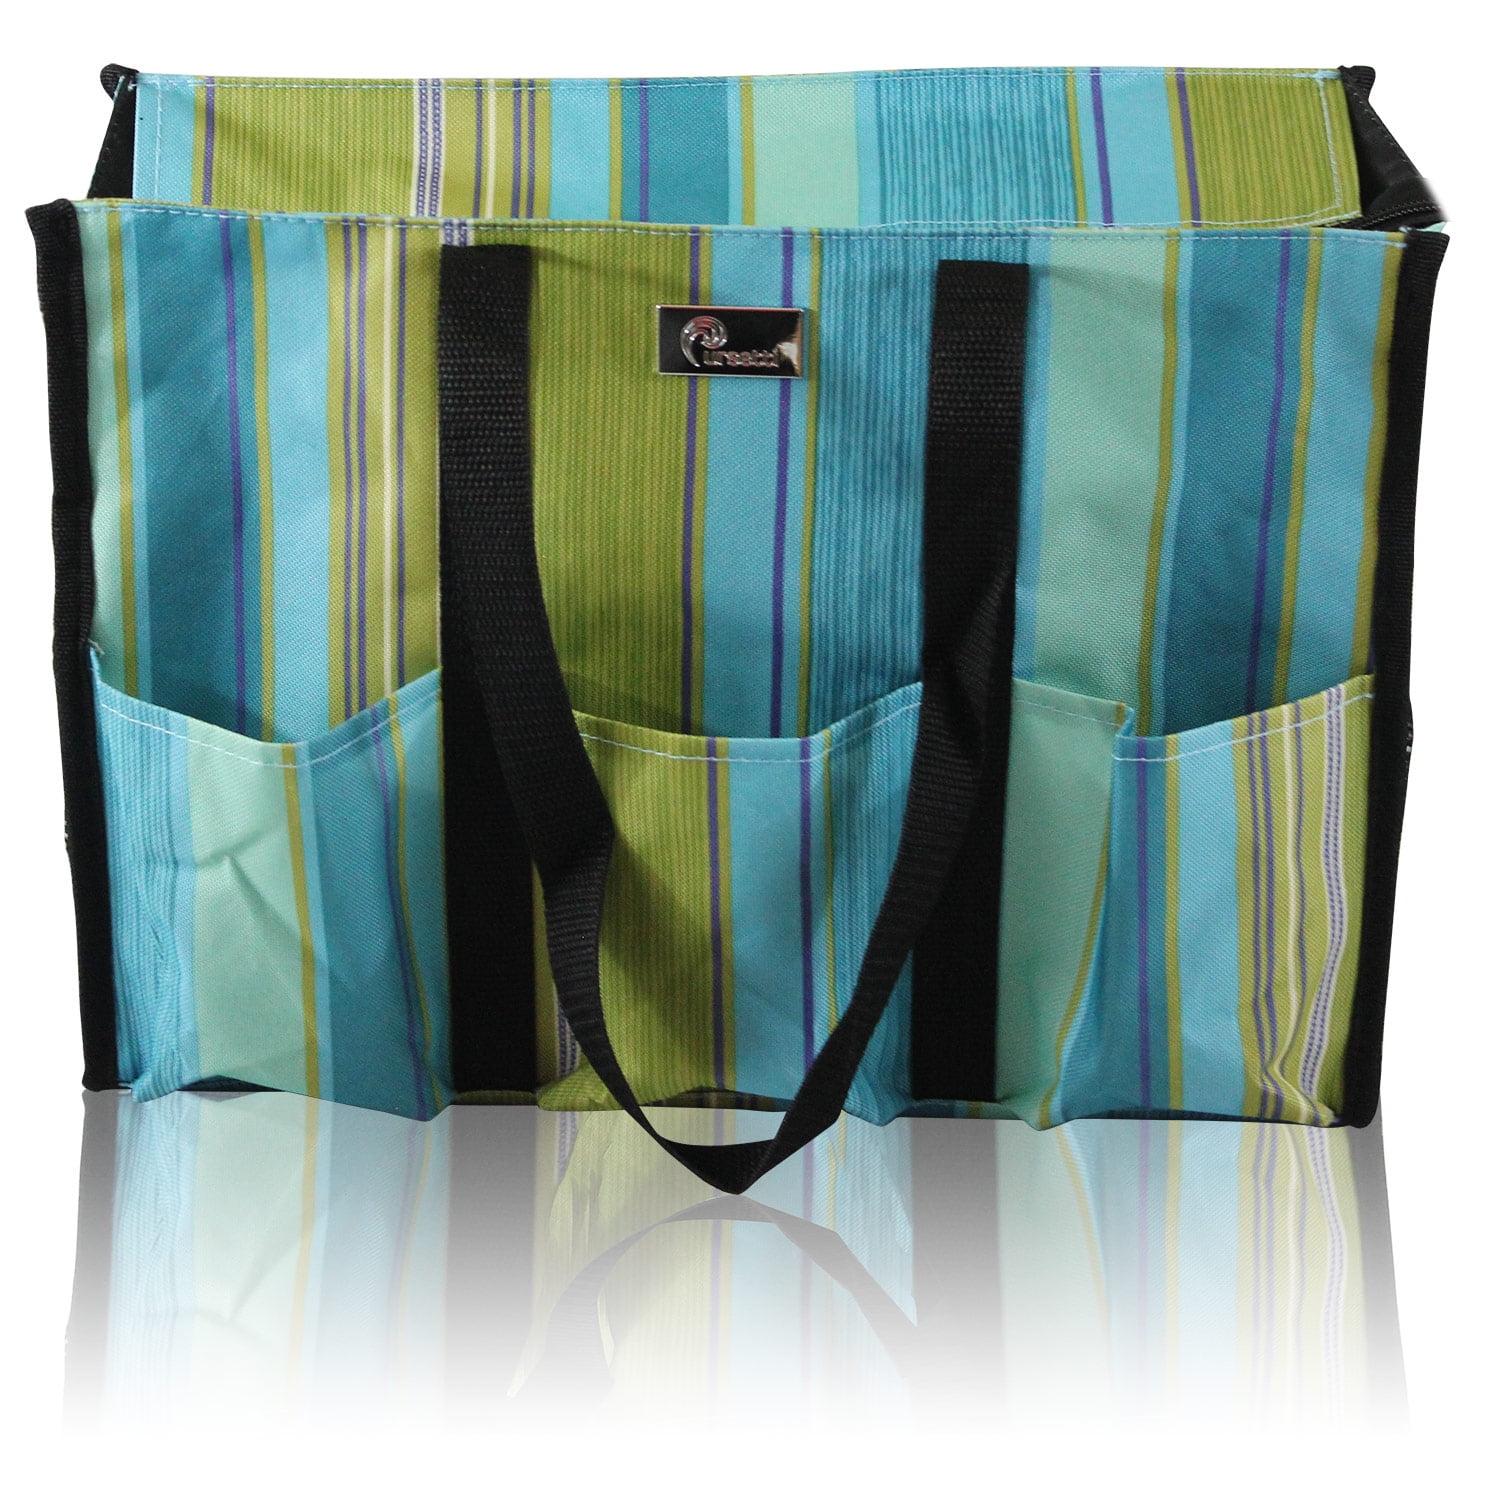 Thirty-One Multi Pocket Tote Bags